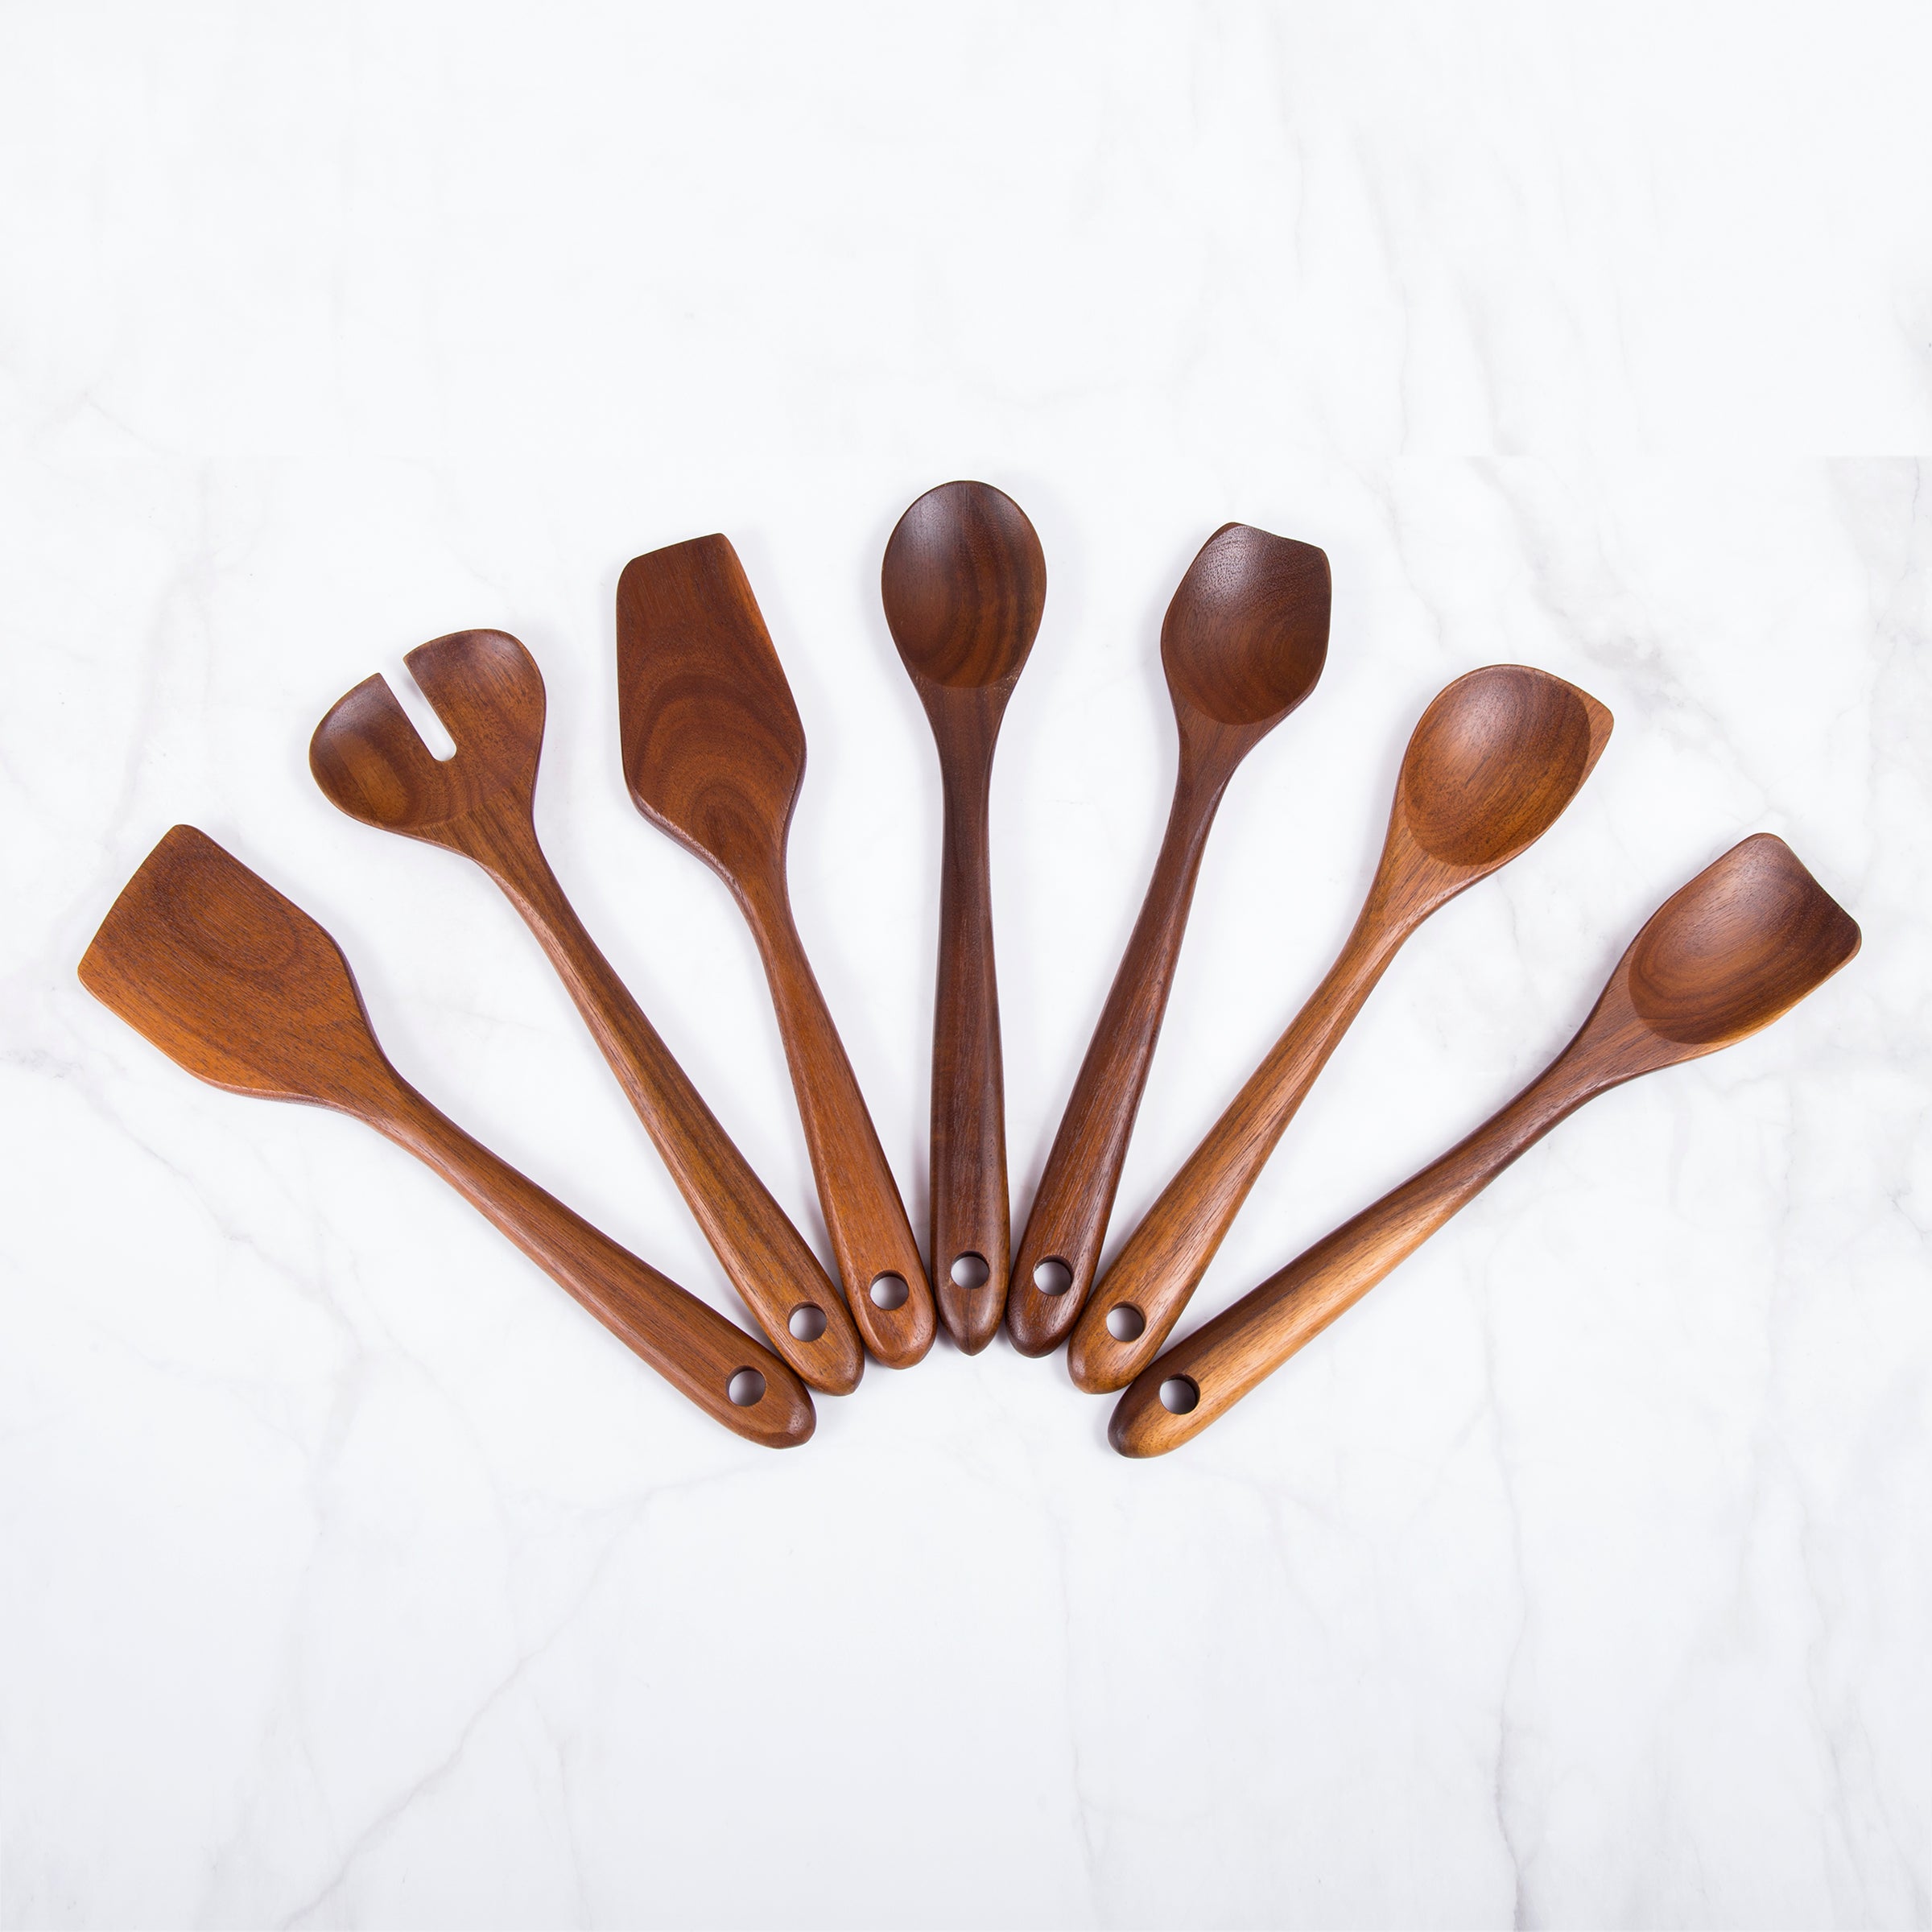 12 Pieces Silicone Natural Acacia Wooden Cooking Utensils Set 